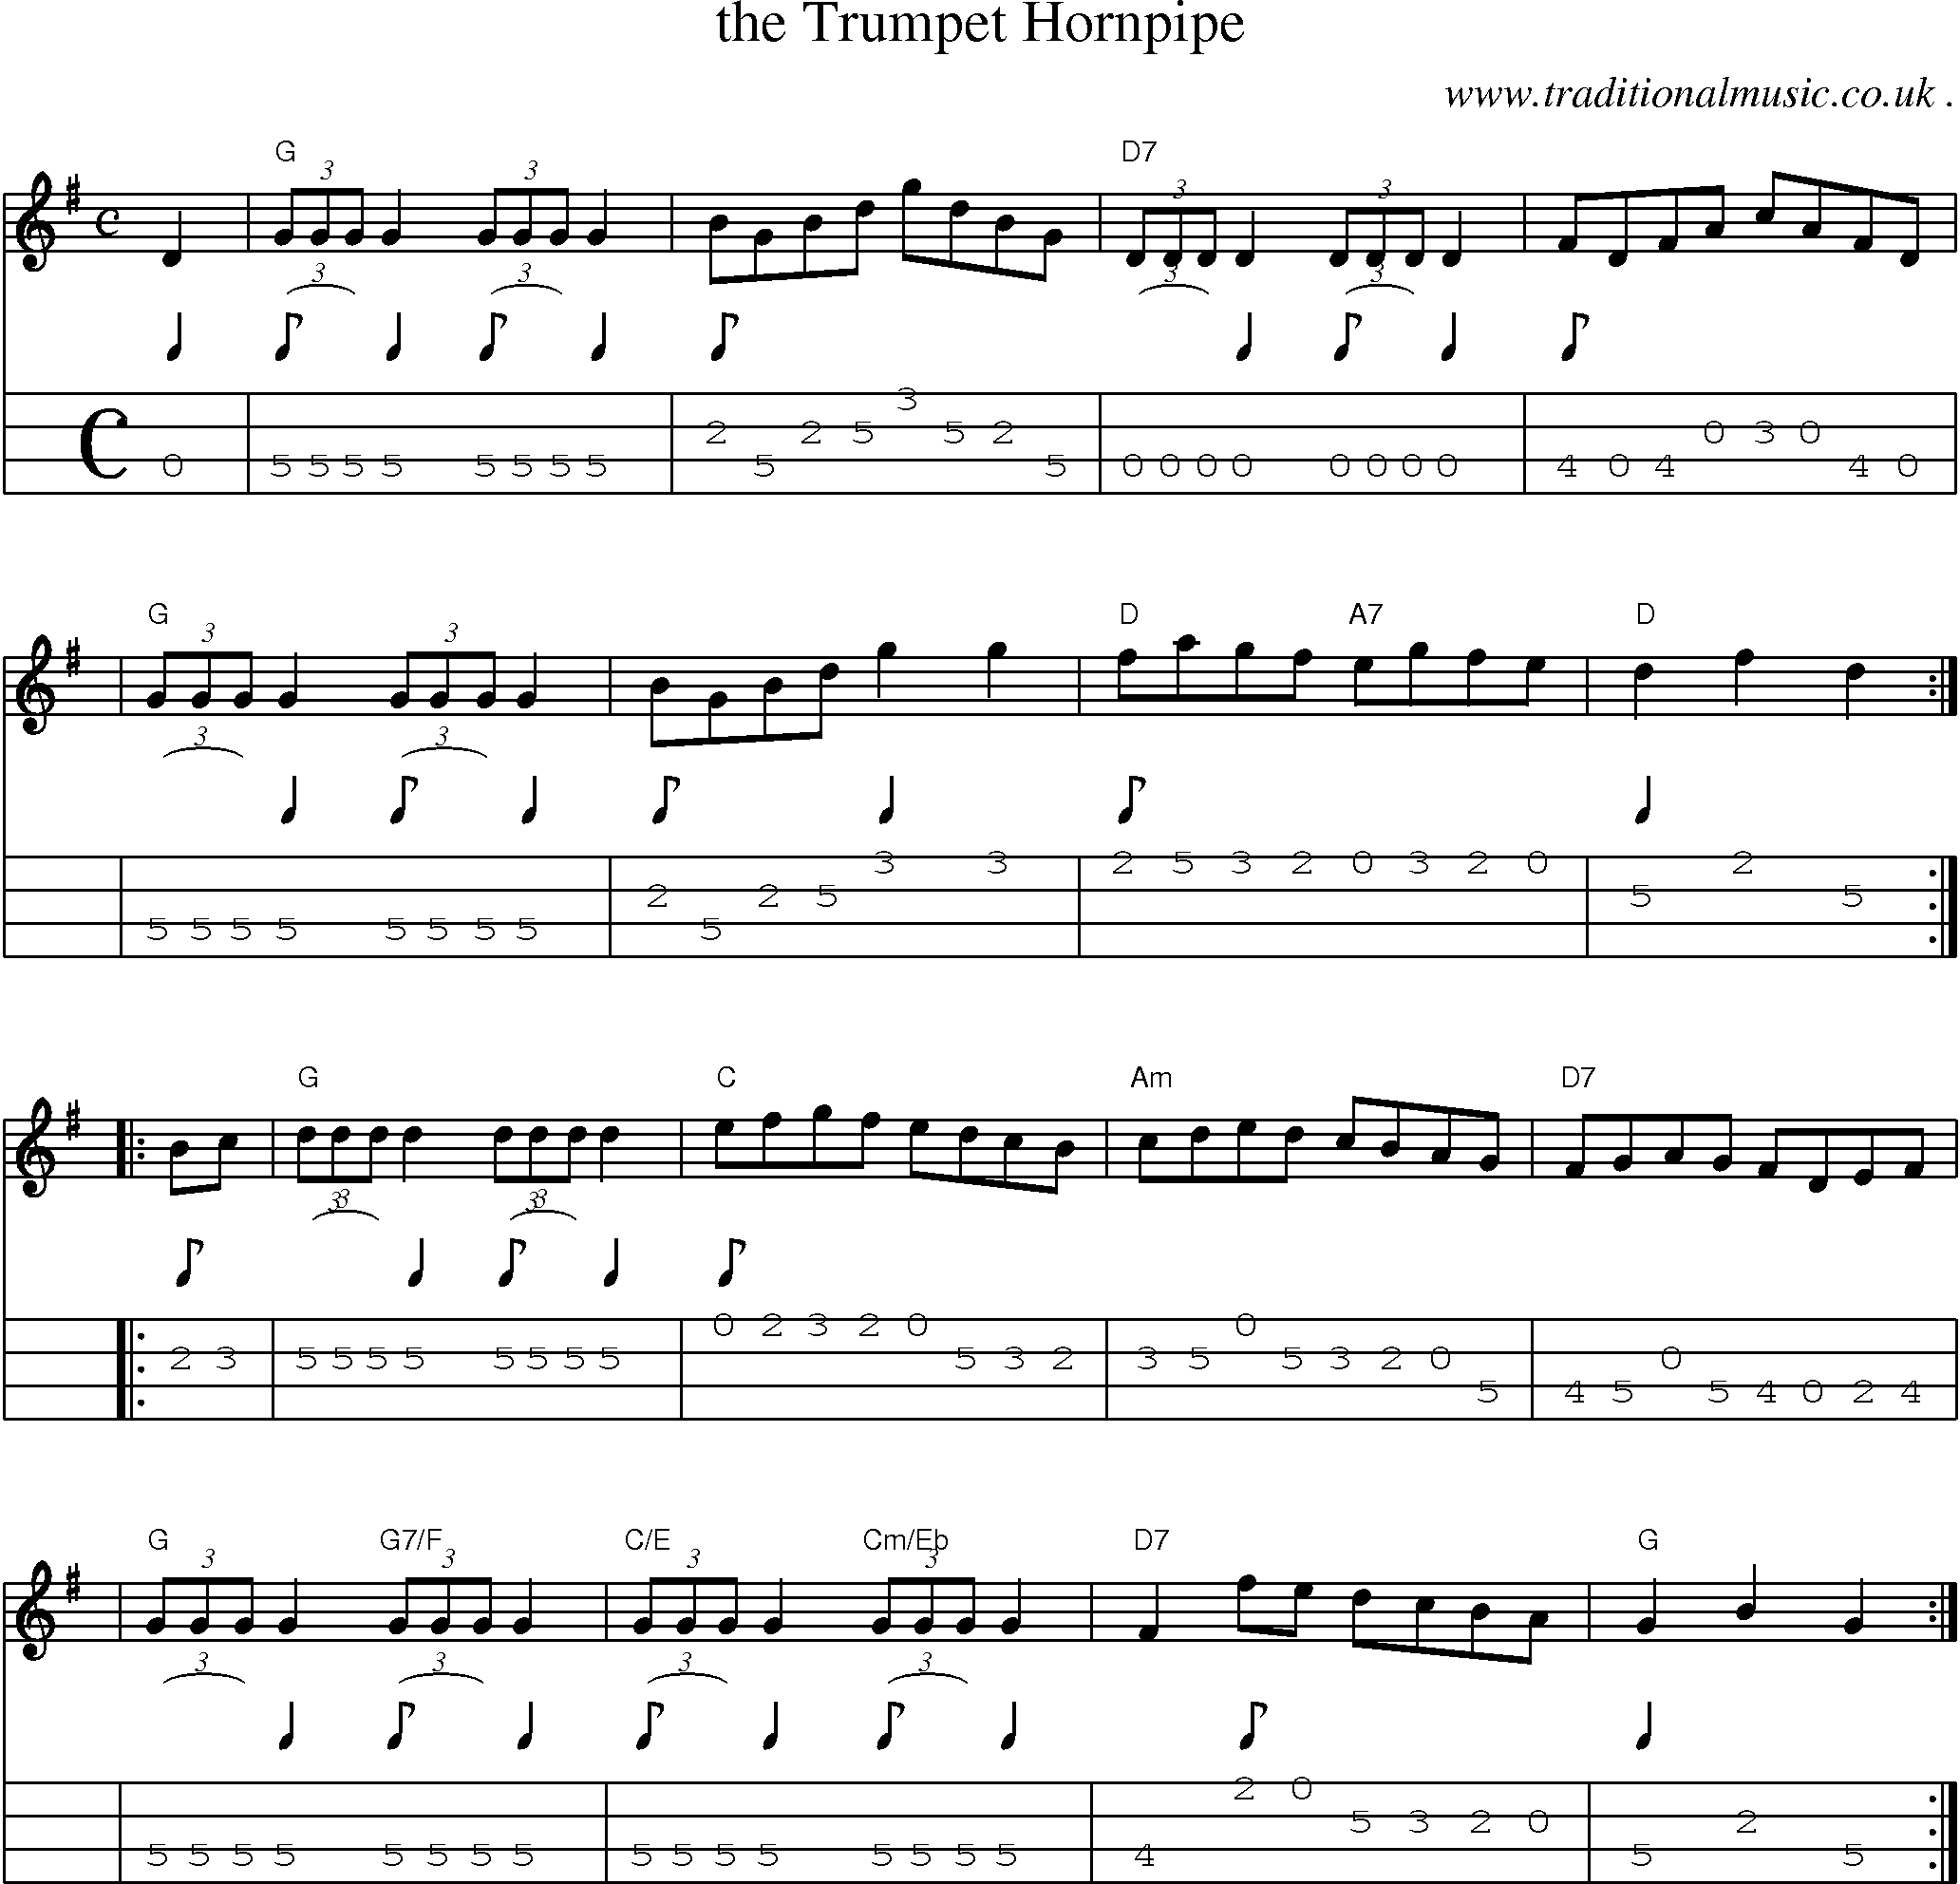 Sheet-music  score, Chords and Mandolin Tabs for The Trumpet Hornpipe